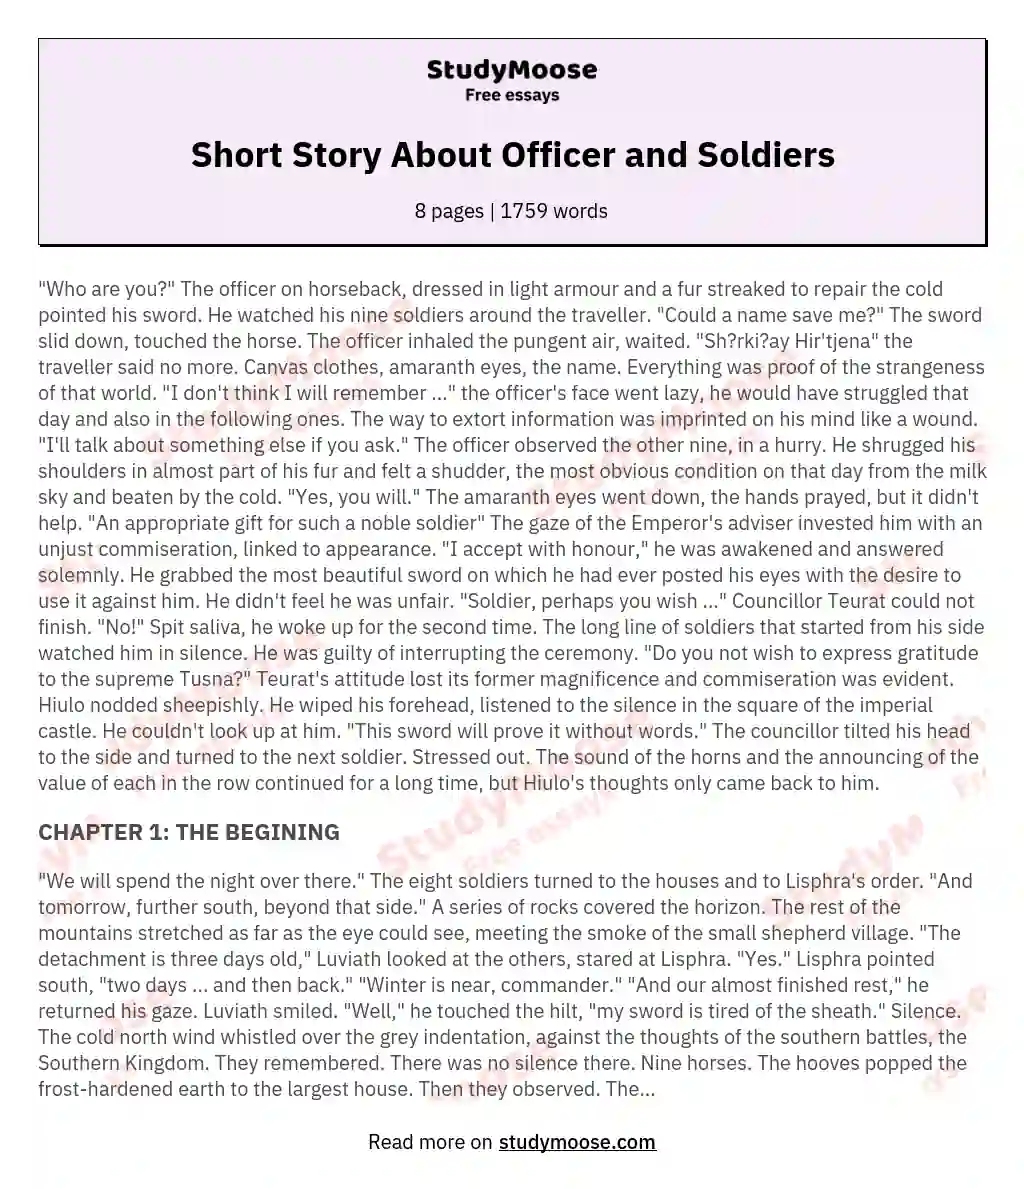 Short Story About Officer and Soldiers essay